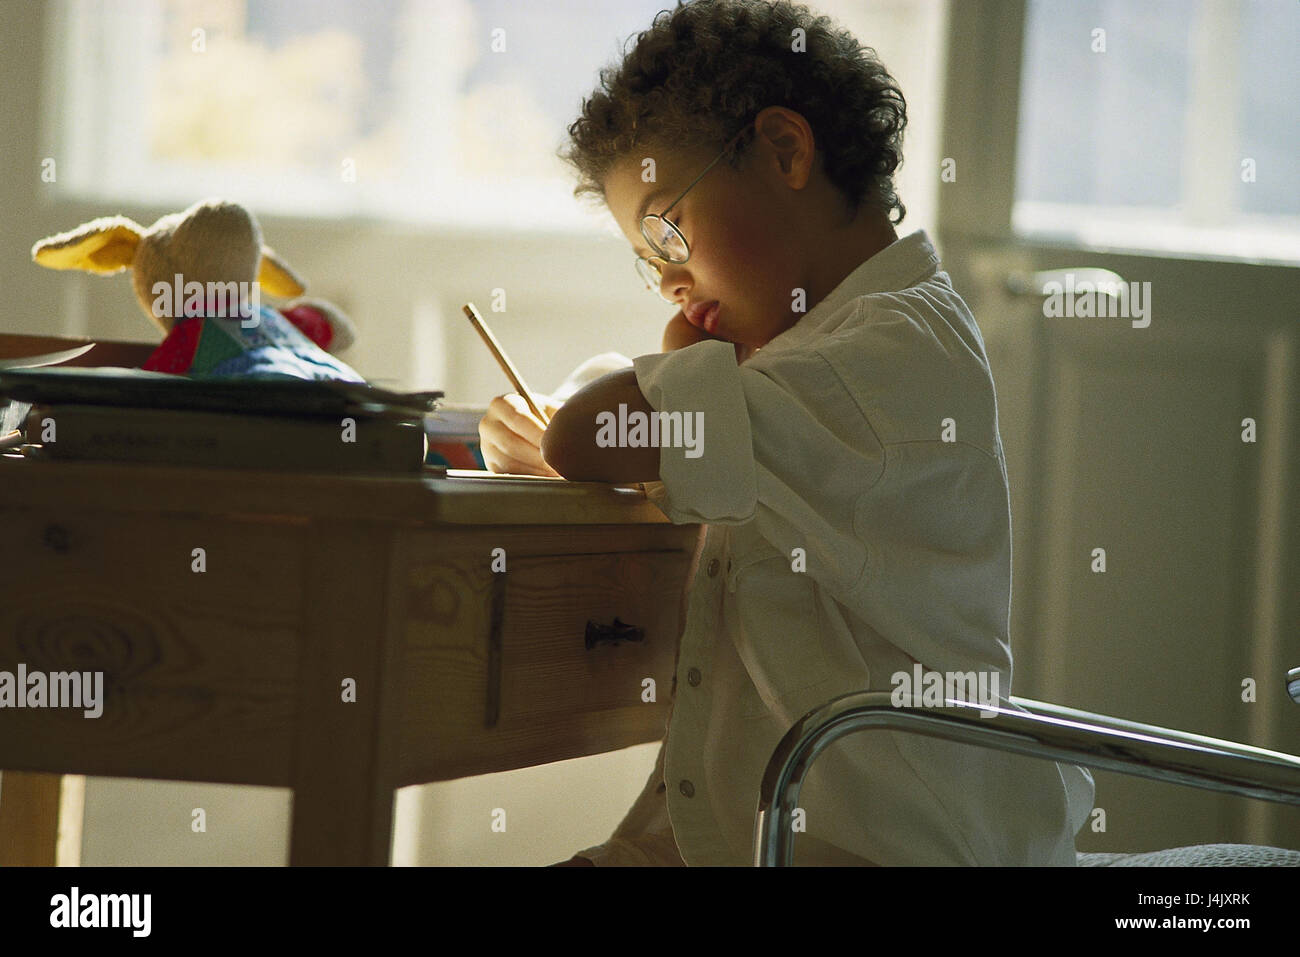 Children's rooms, girls, swarthy, glasses, homework, write inside, at home, child, blond, long-haired, learn, schoolgirl, school child, school assignments, house practise, assignment Stock Photo